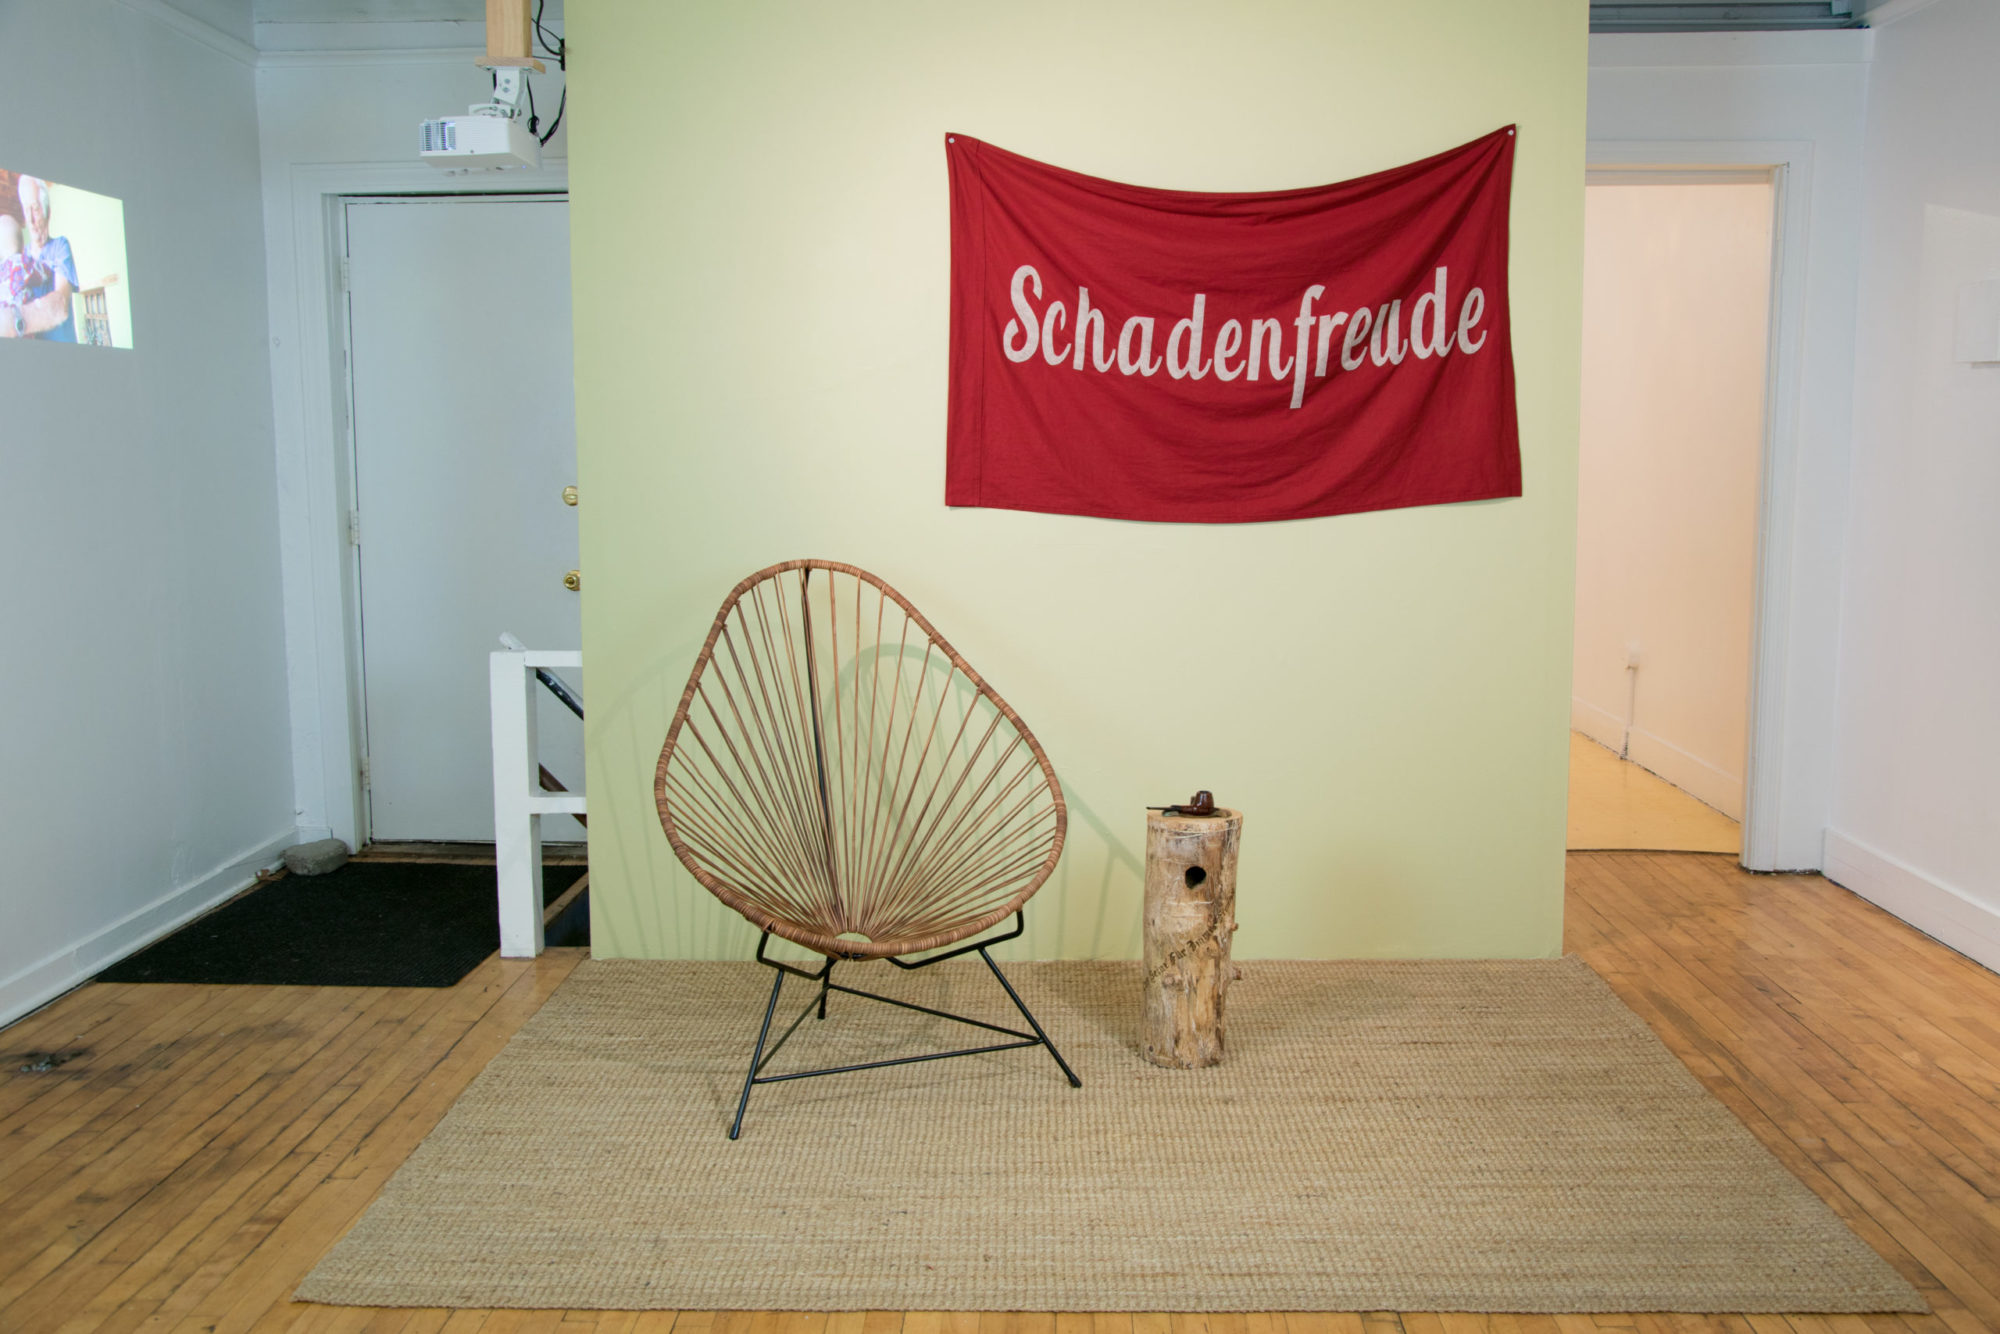 A sparse wick lounge chair is located beside a short stand made of light brown wood. The stand is underneath a red sheet hanging on the wall behind it, with the word 